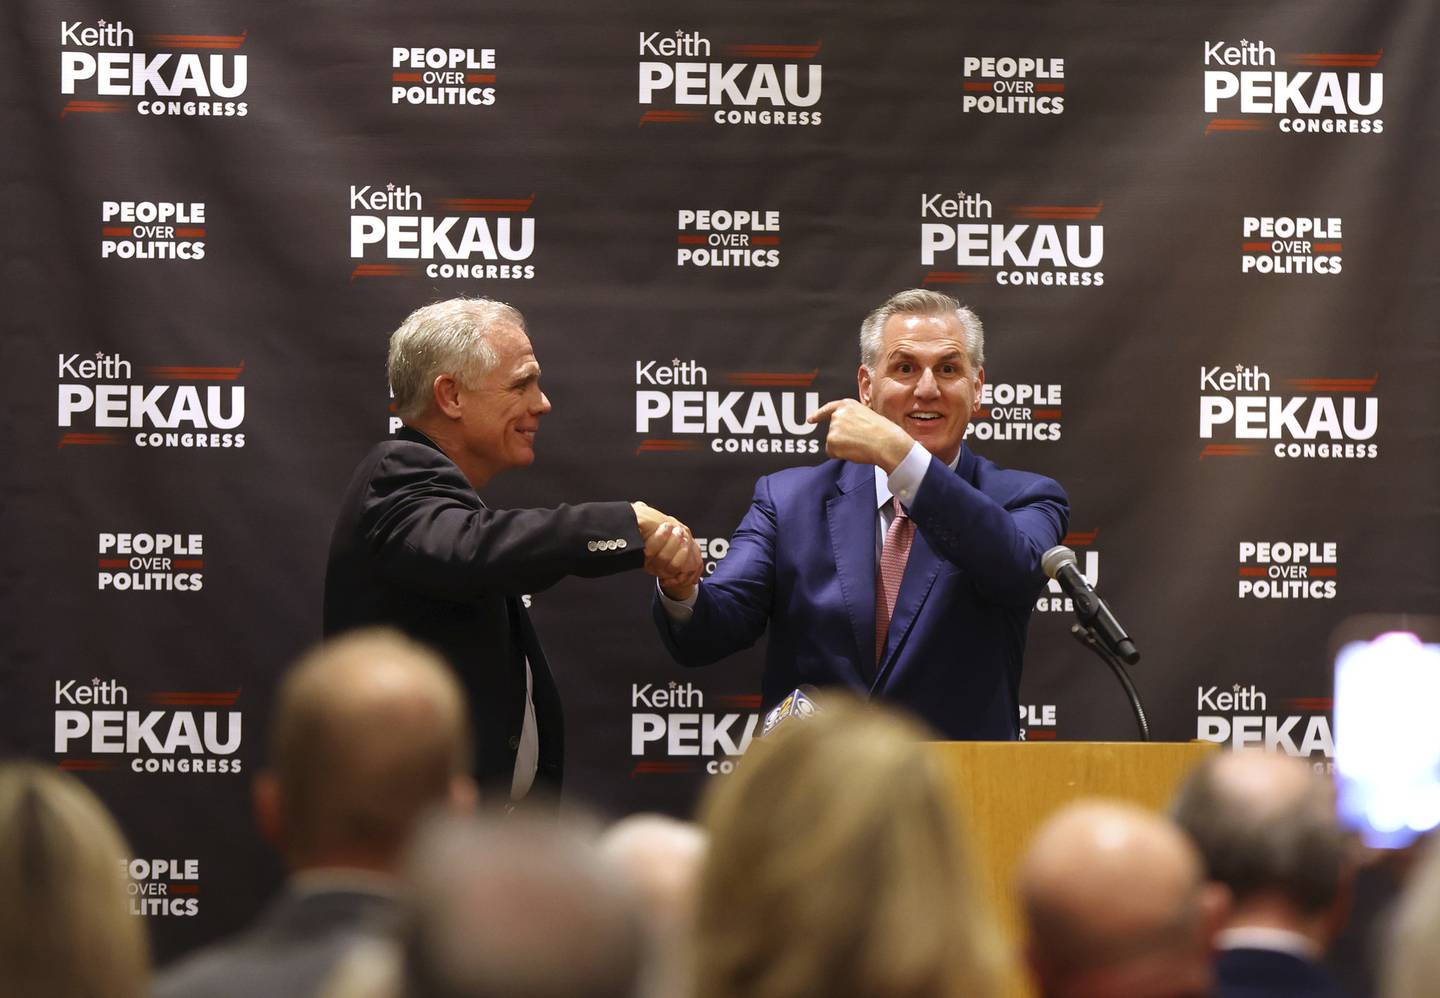 House Minority Leader Kevin McCarthy, right, welcomes to the stage Orland Park Mayor Keith Pekau, left, who is running as a Republican in Illinois’ 6th Congressional District race, during a campaign and fundraising event for Pekau in Oak Brook on Nov. 4, 2022.    